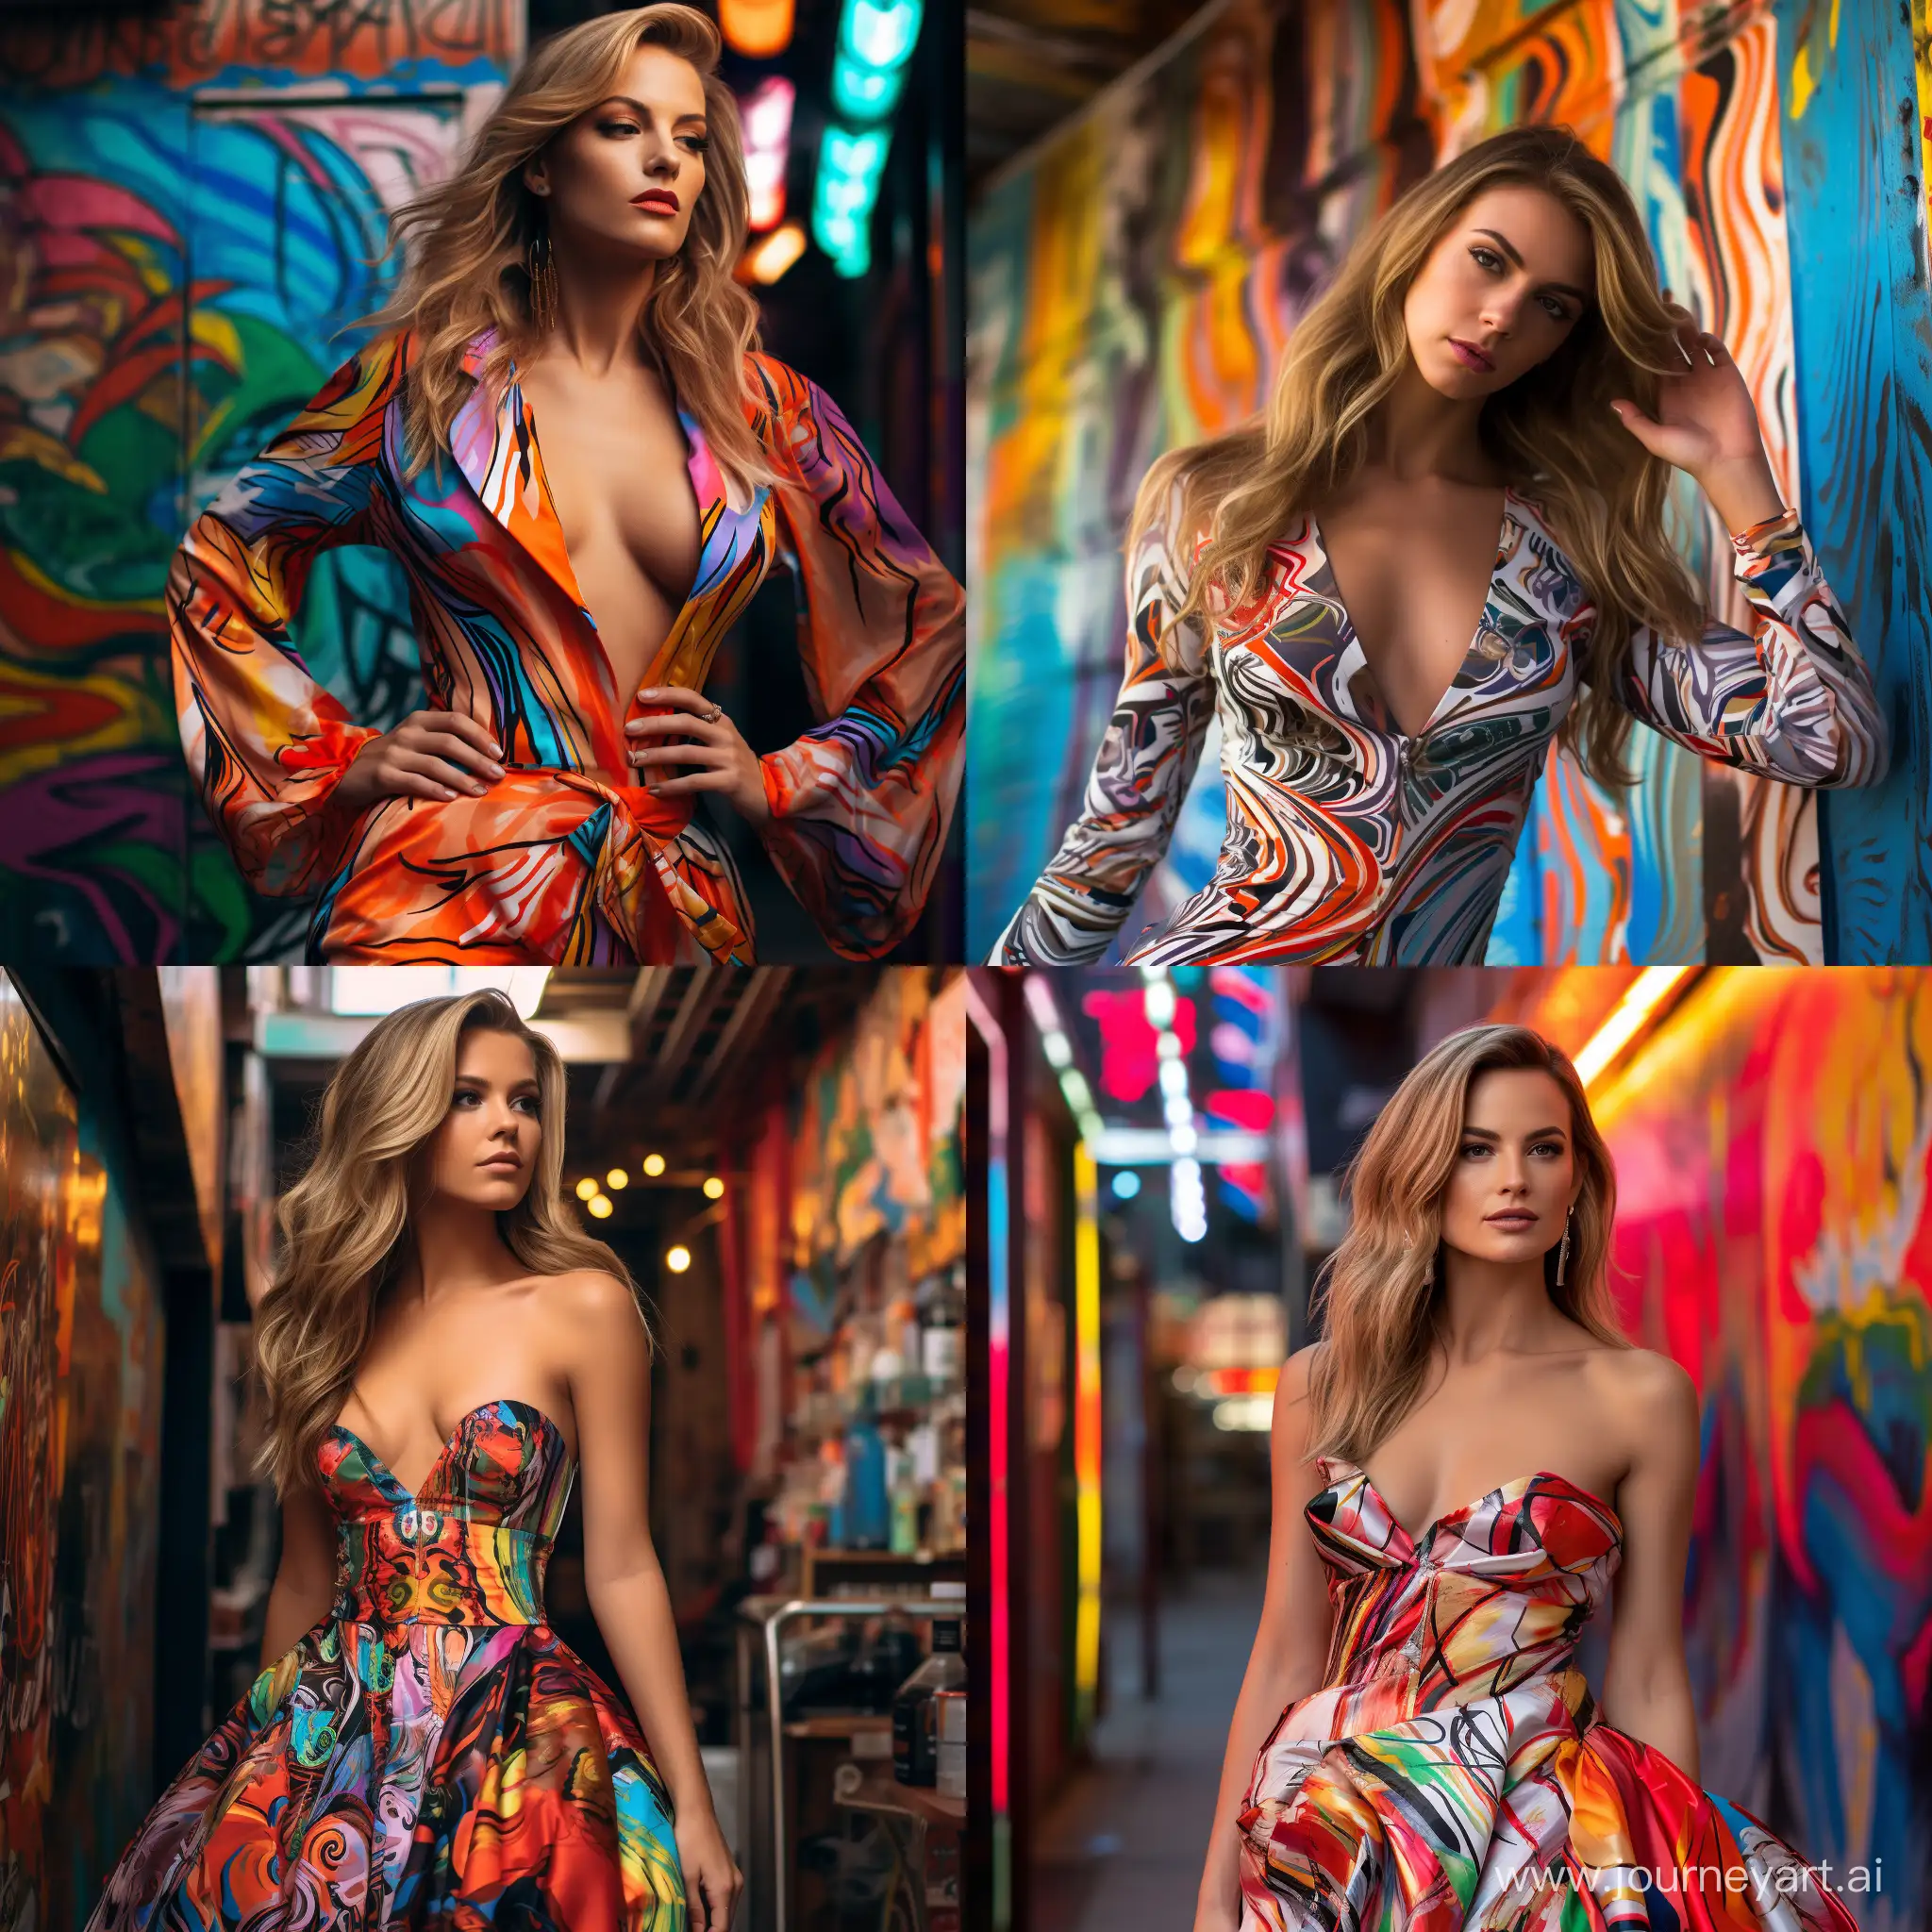 kelly boesch style, vibrant fashion model, flowing patterned dress, bold contrasting colors, graffiti-covered wall, bustling city, neon lighting, 16:9 aspect ratio, high artistic level